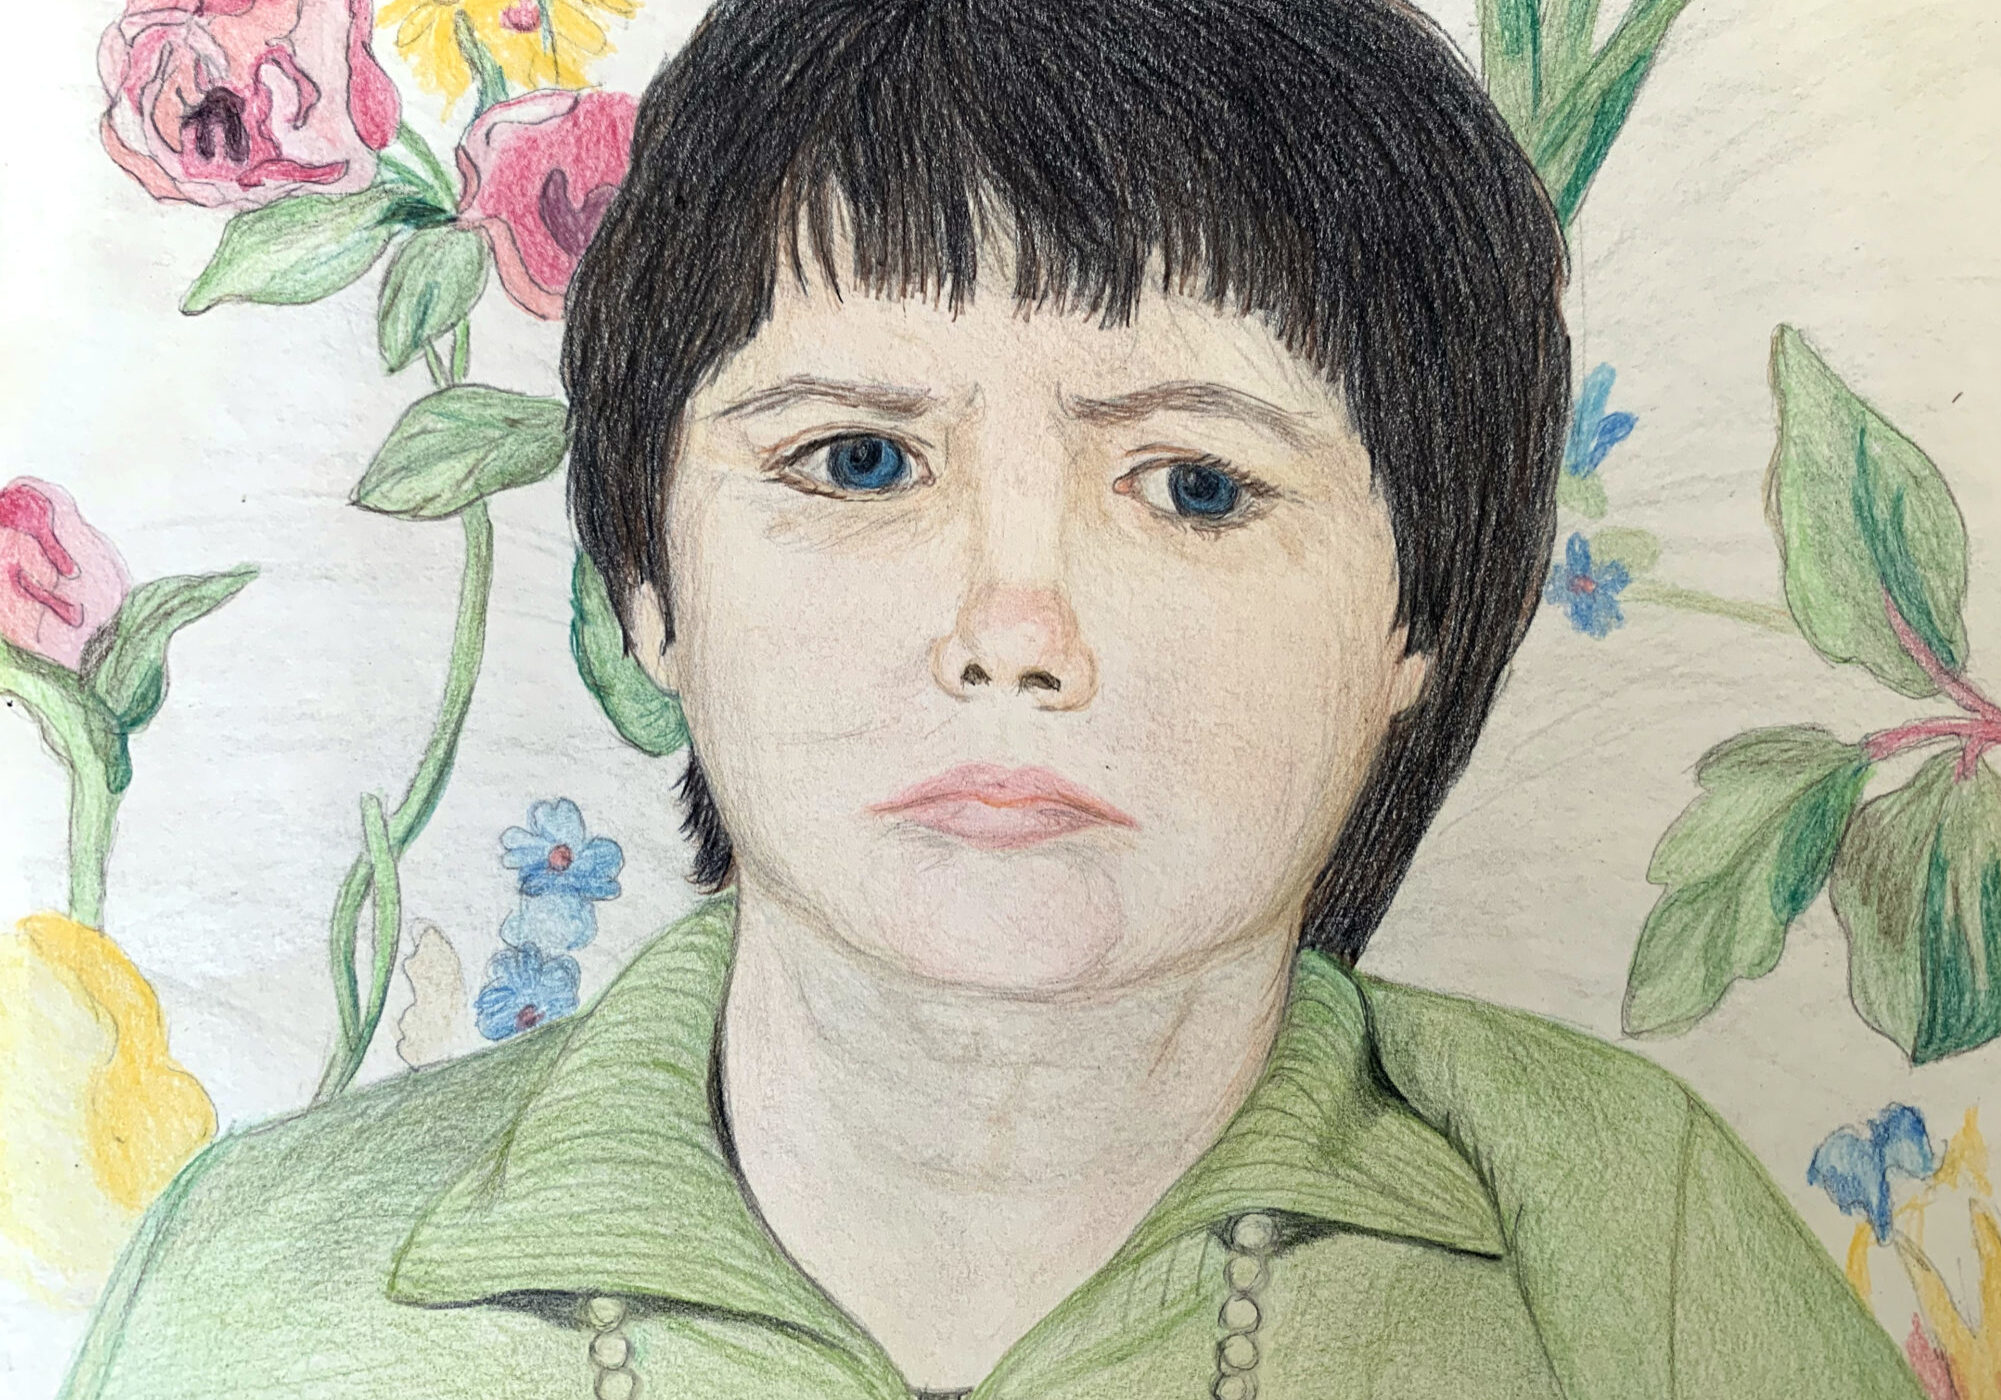 Colored pencil drawing of woman with dark hair and blue eyes wearing green shirt against floral chair